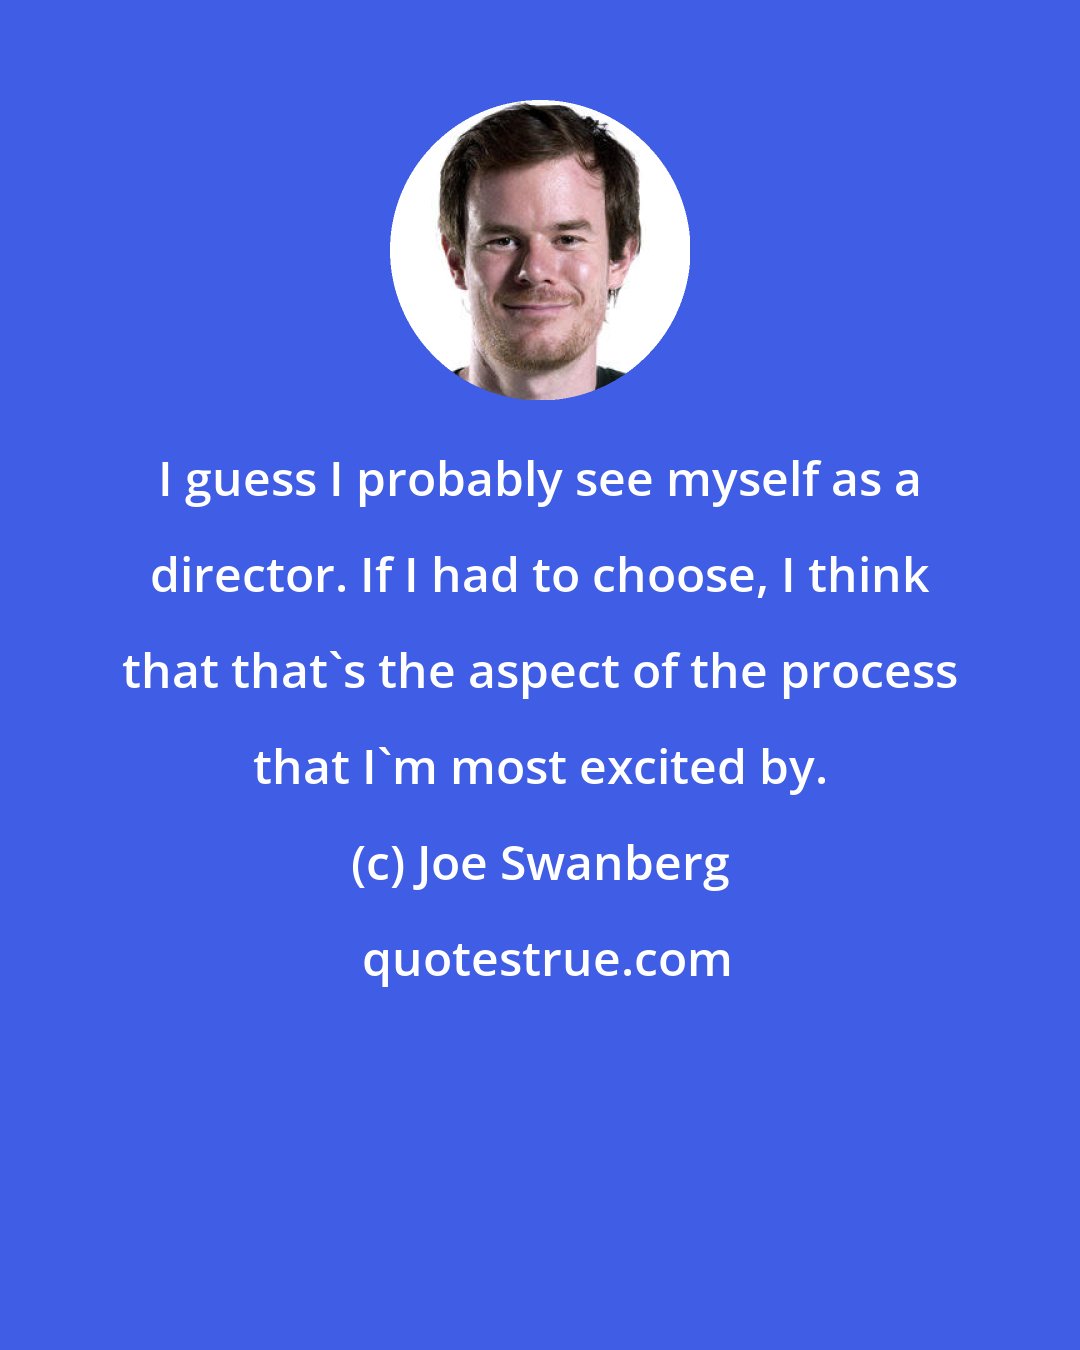 Joe Swanberg: I guess I probably see myself as a director. If I had to choose, I think that that's the aspect of the process that I'm most excited by.